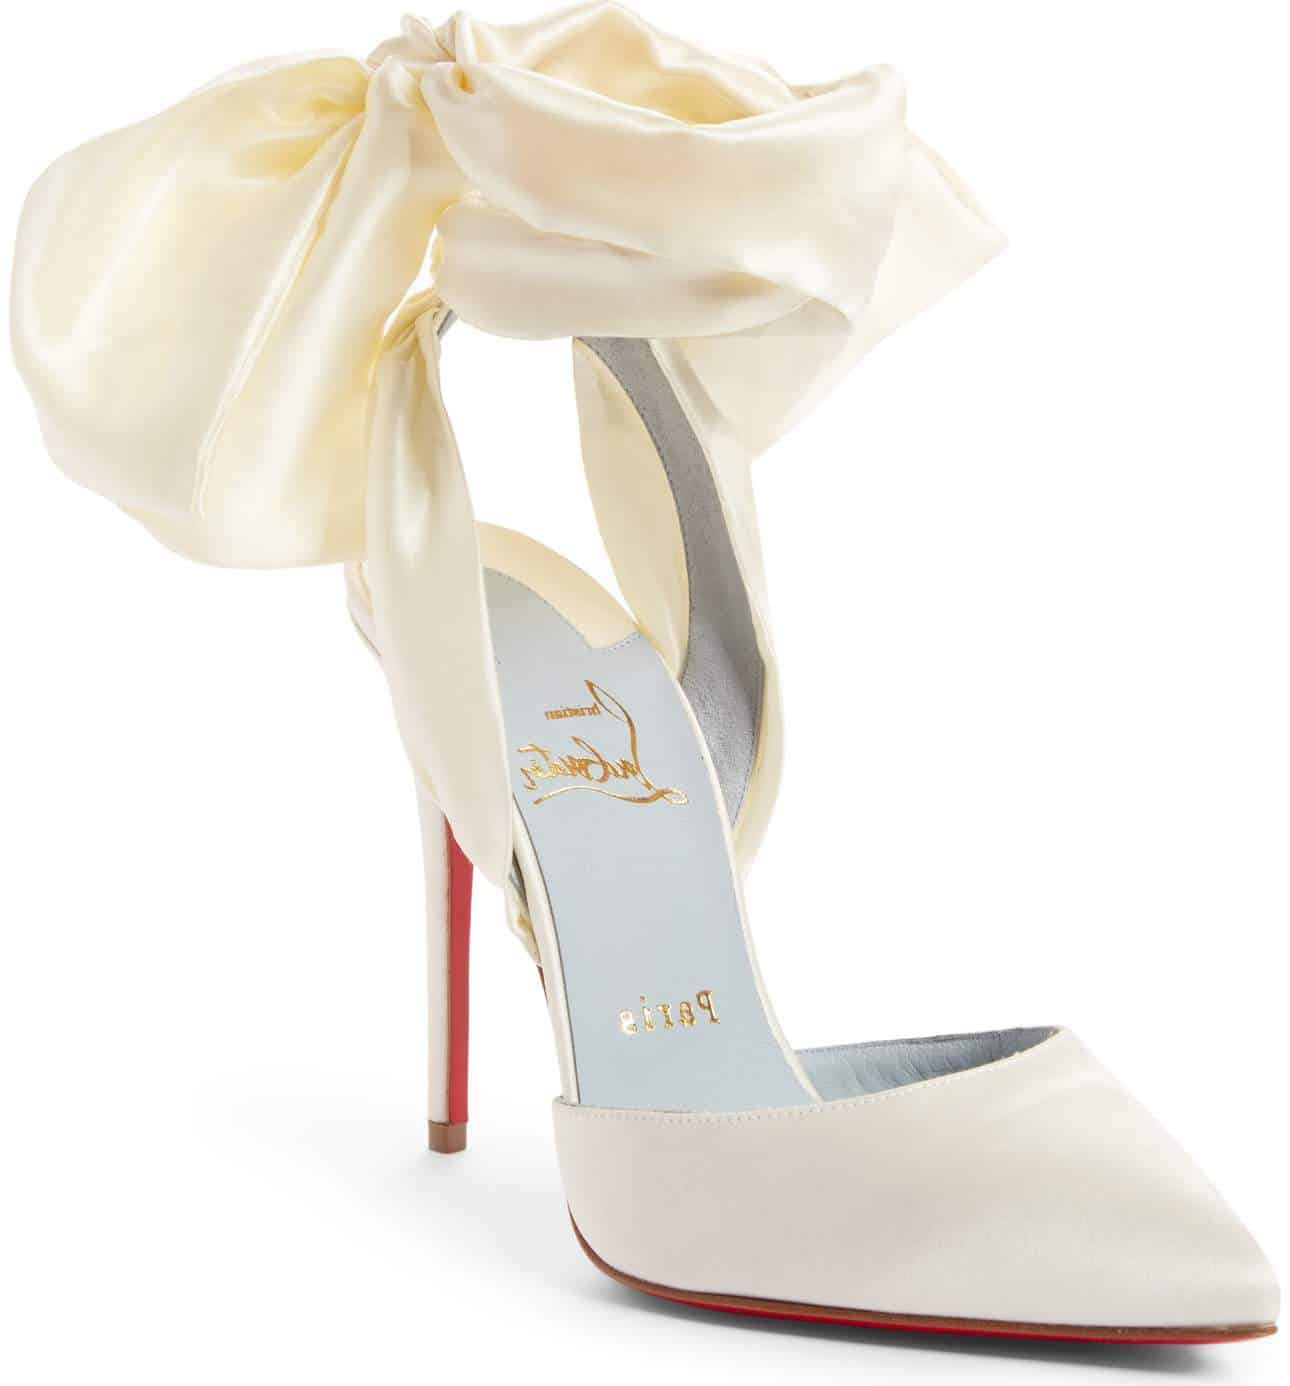 Christian Louboutin Wedding Shoes Luscious Red Sole Designs